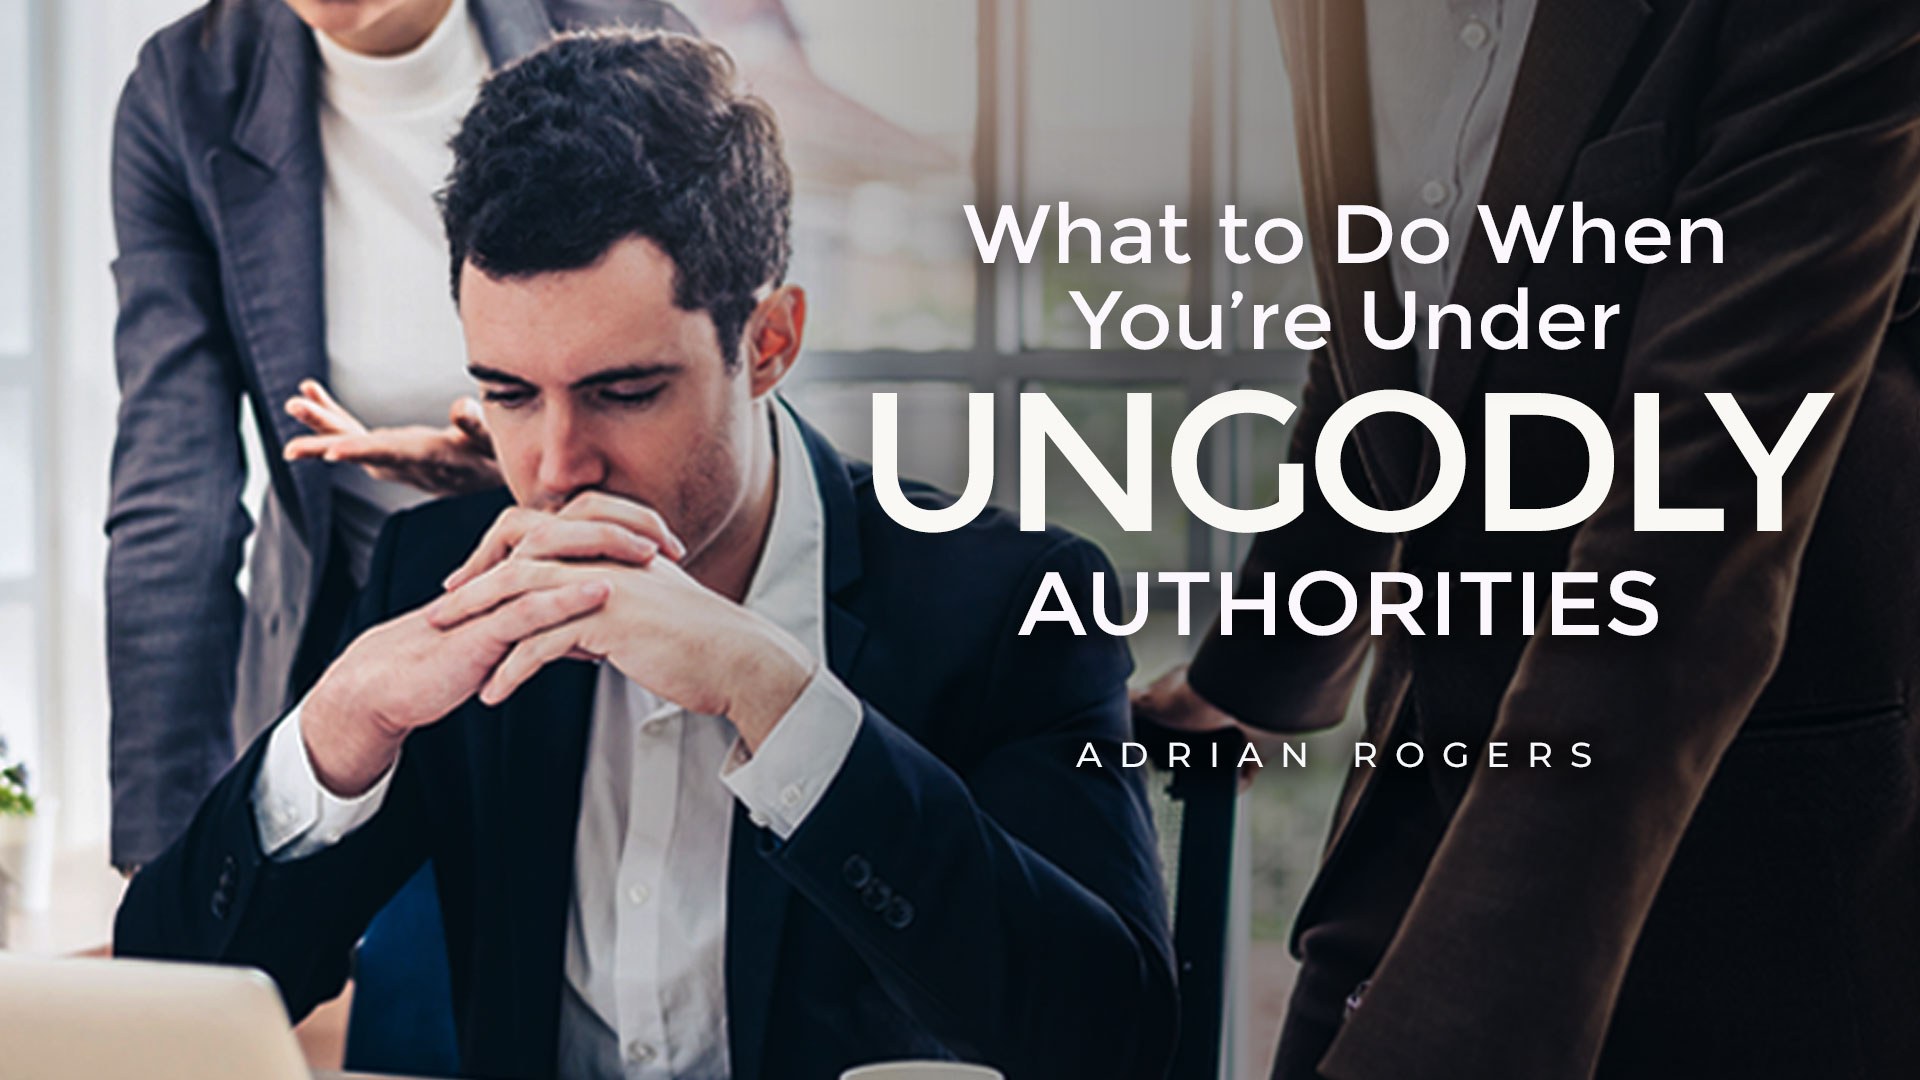 What to do Under Ungodly Authorities 1920x1080